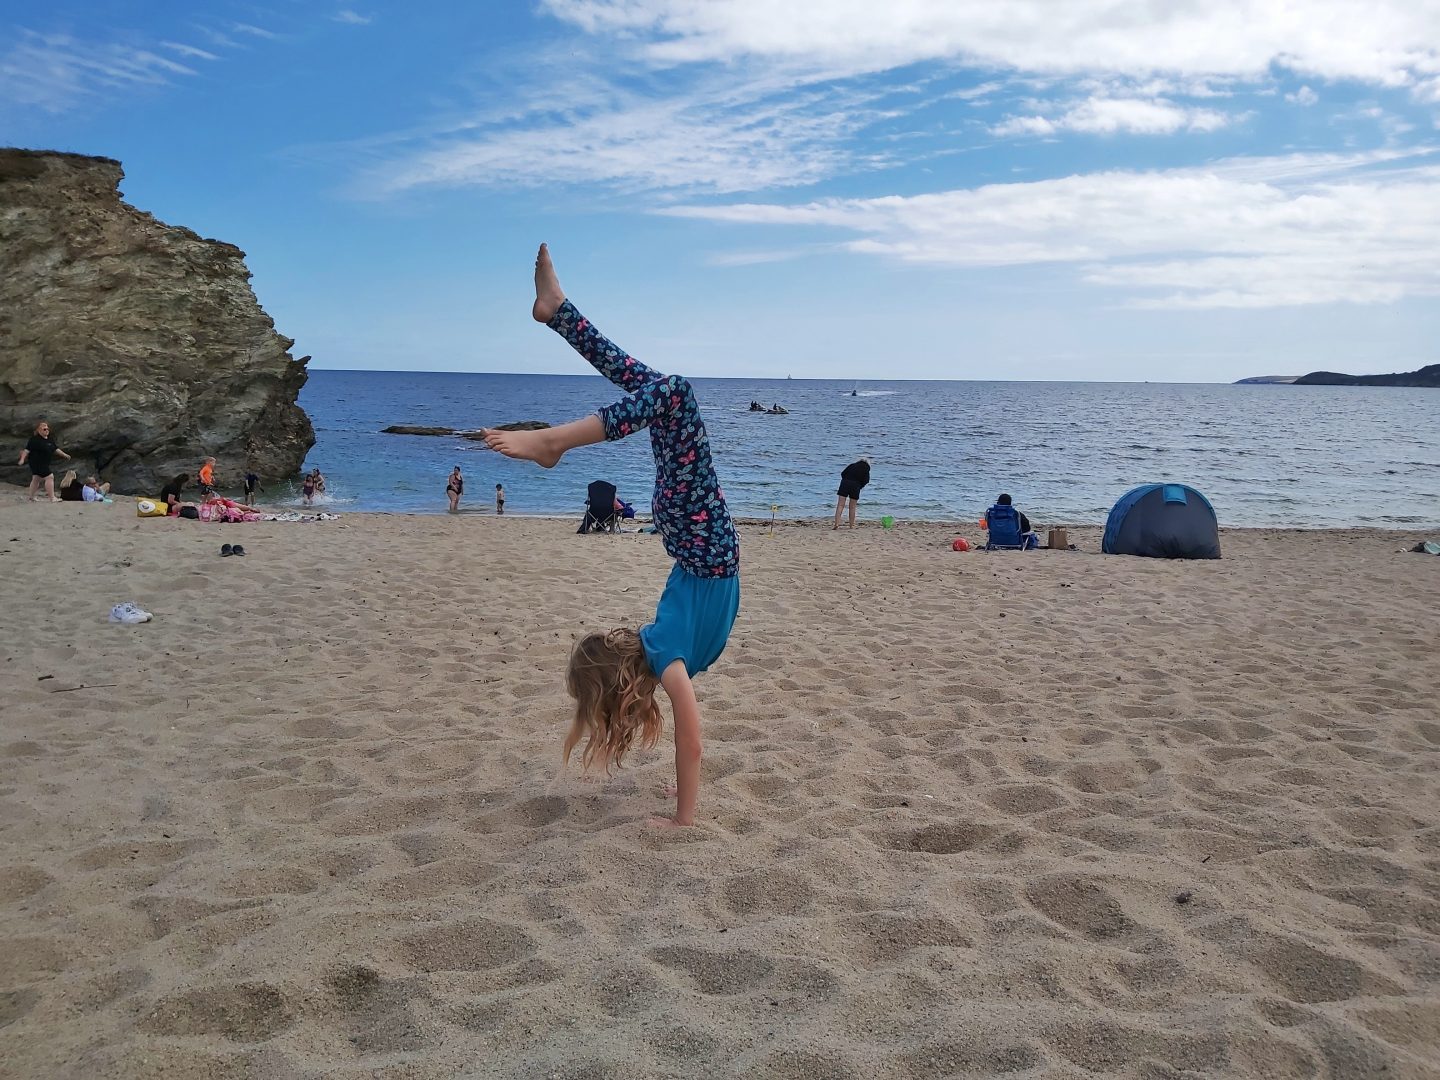 Girl doing handstand on a sandy beach with blue sky and sea behind and a large rock to left hand side